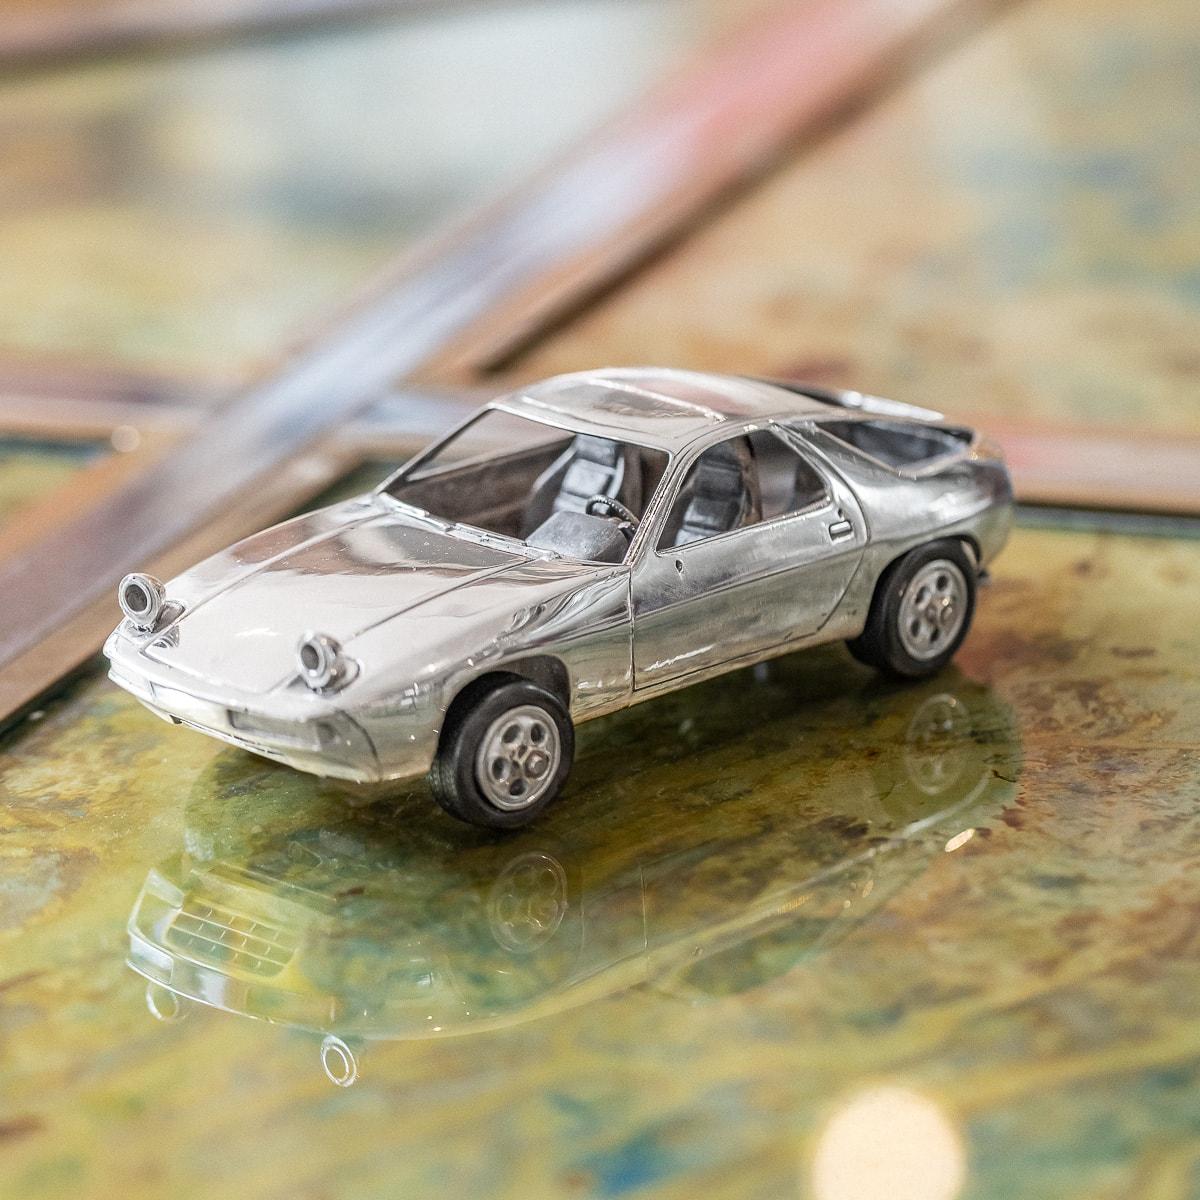 A stunning 20th Century solid silver model of a Porsche 928 sports car. This timeless model has wheels fitted with Pirelli rubber tyres. The exterior is polished to a high shine and internally there is exceptional detail within the interoir; the